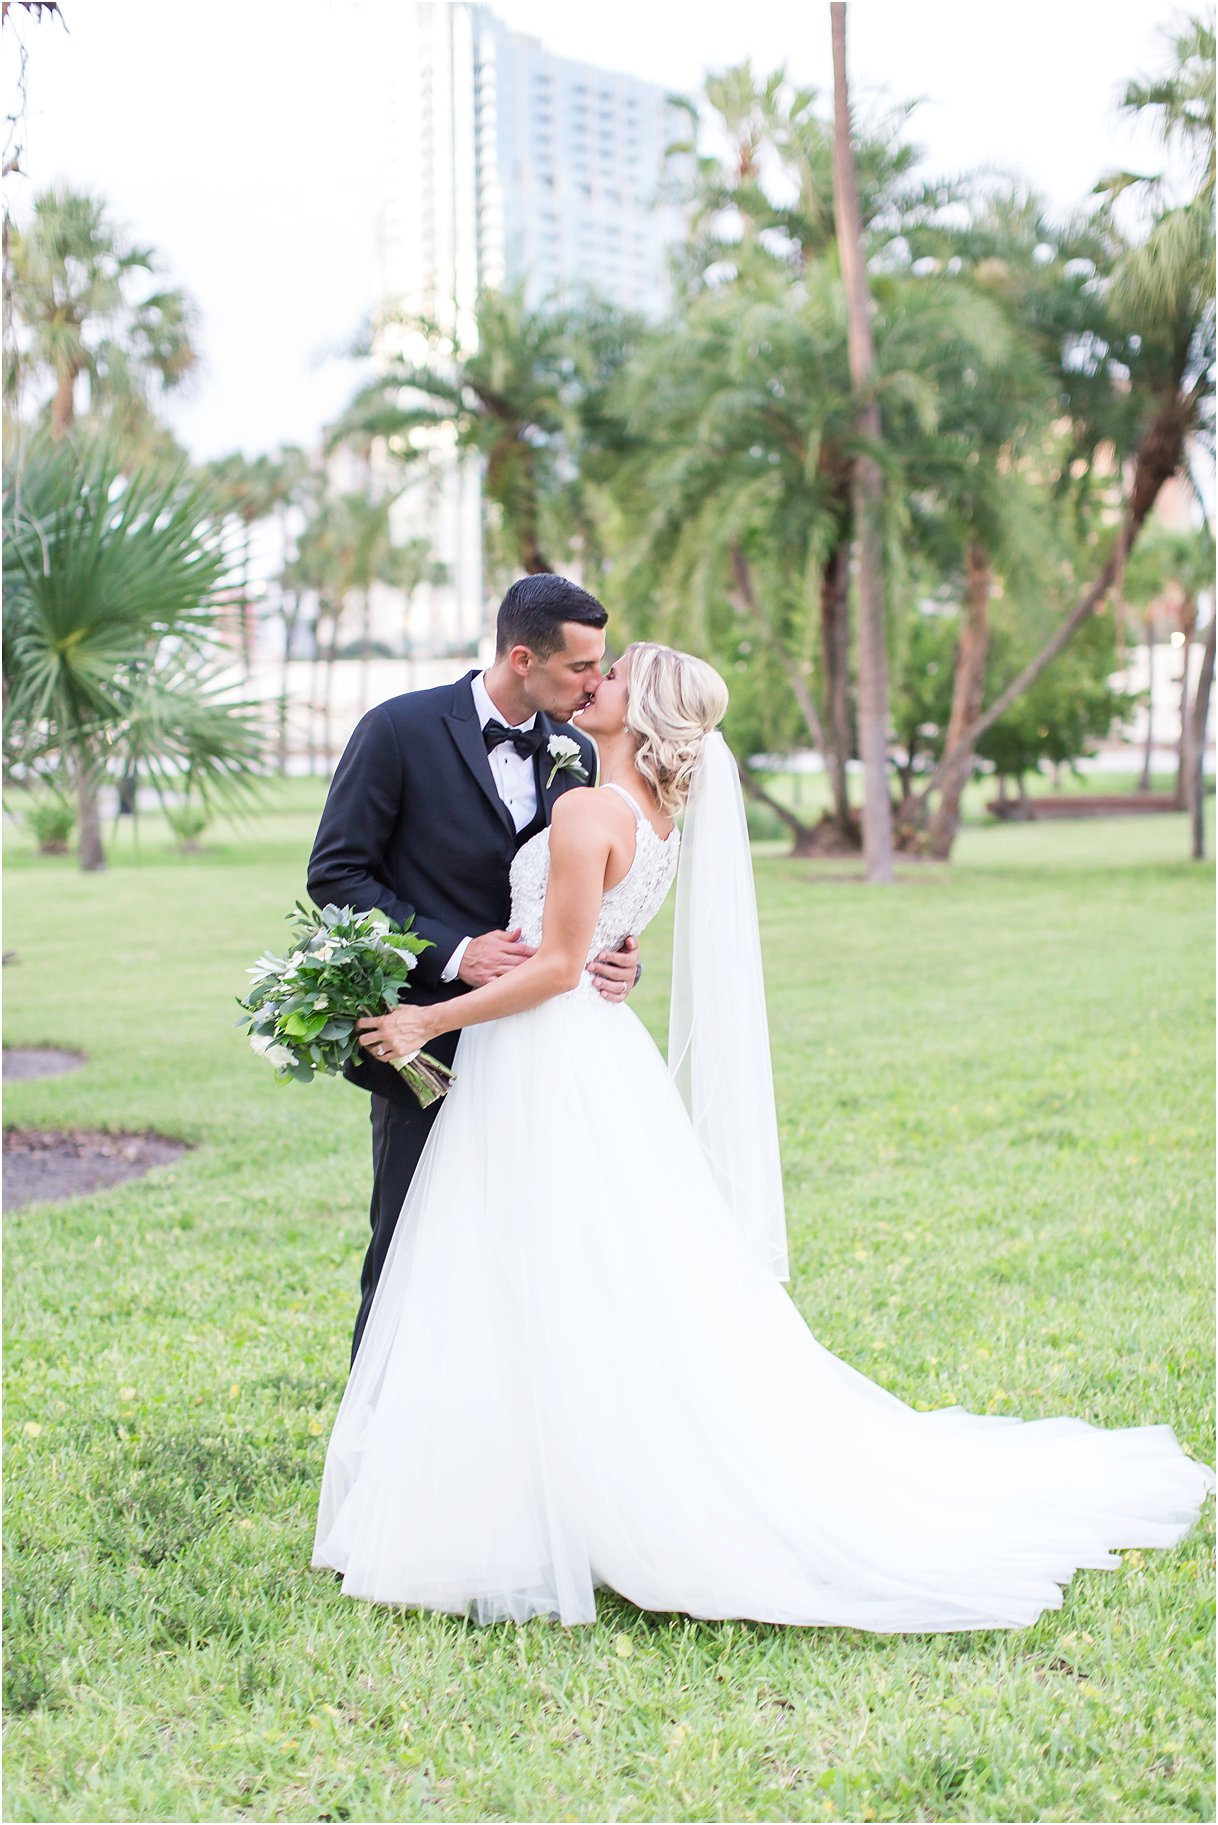 Formal Portraits at Tampa University Oxford Exchange Wedding Tampa PSJ Photography in Maggie Soterro Lisette and black tux and bow tie 